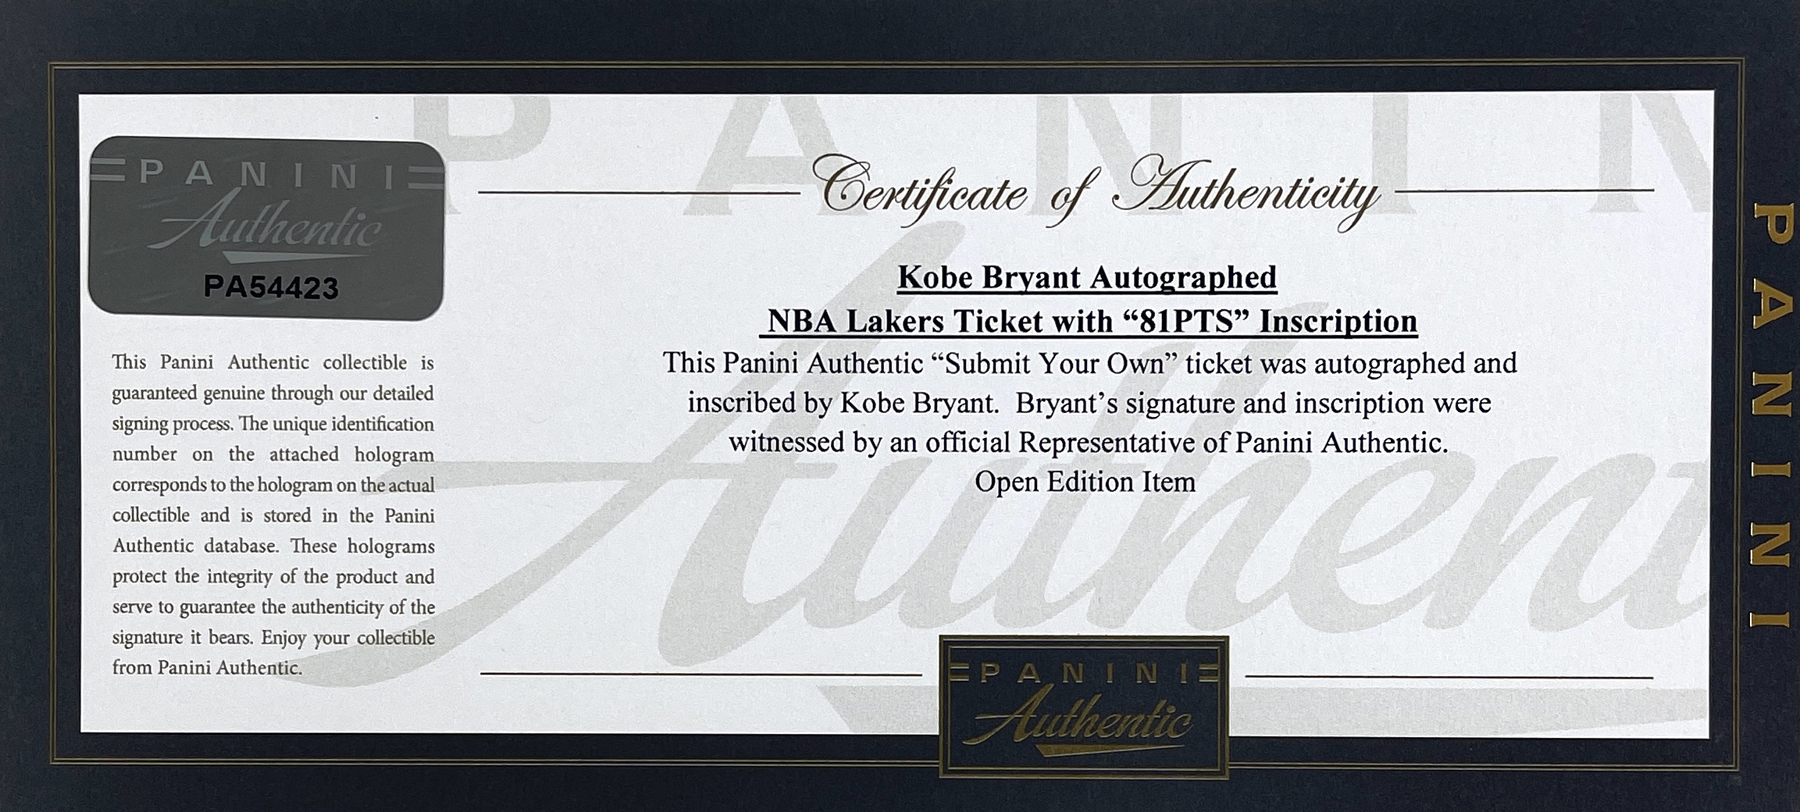 KOBE BRYANT Autographed '81 Point Game' Emb. Authentic